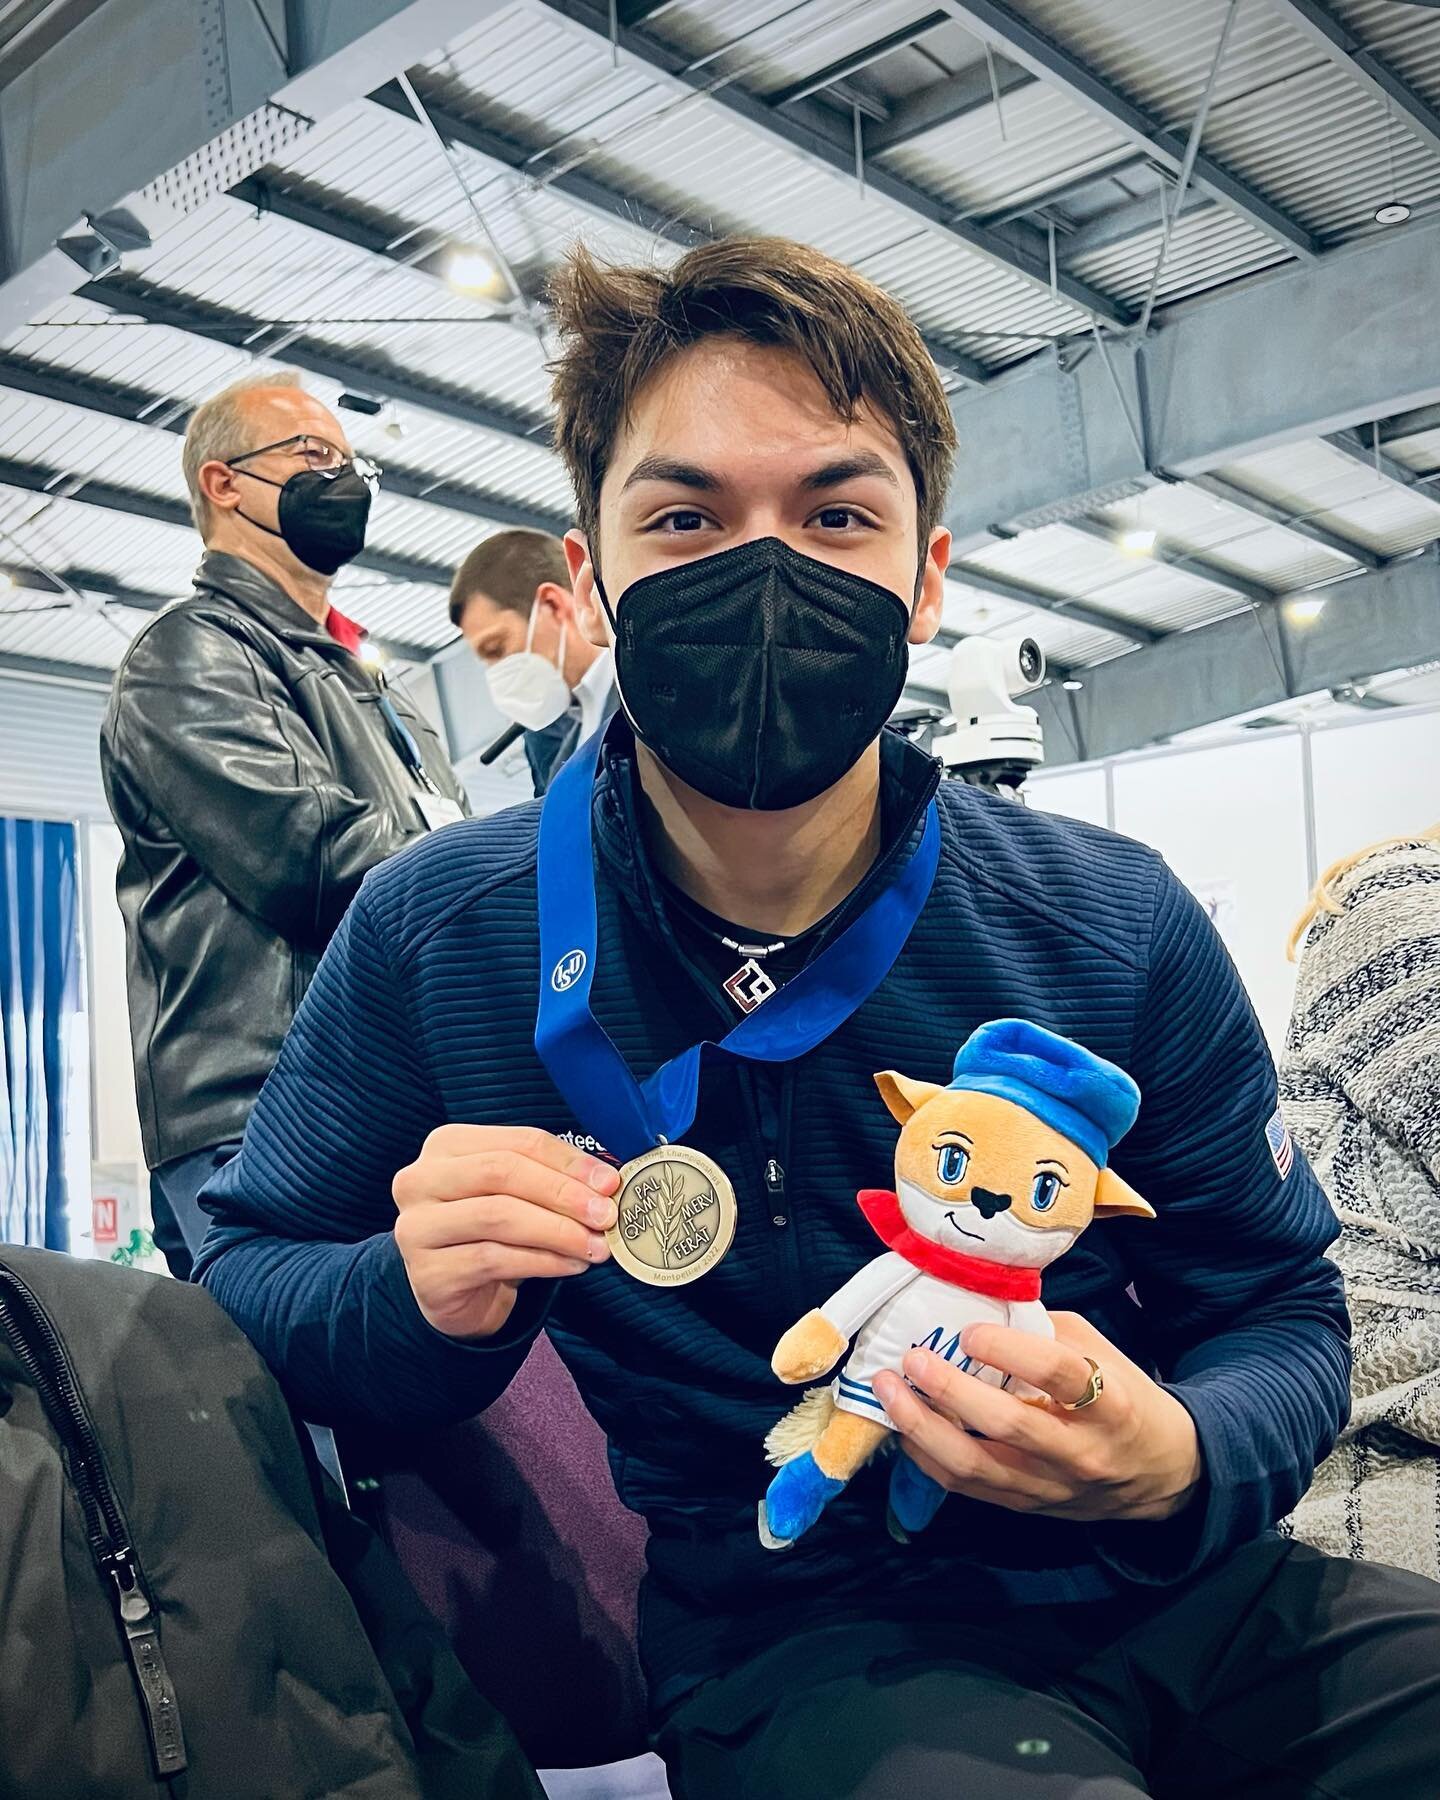 Camden Pulkinen came to Montpellier and went home with a small World medal (bronze in the free skate) and a Lou Lou. #Worlds2022 #WorldFigure